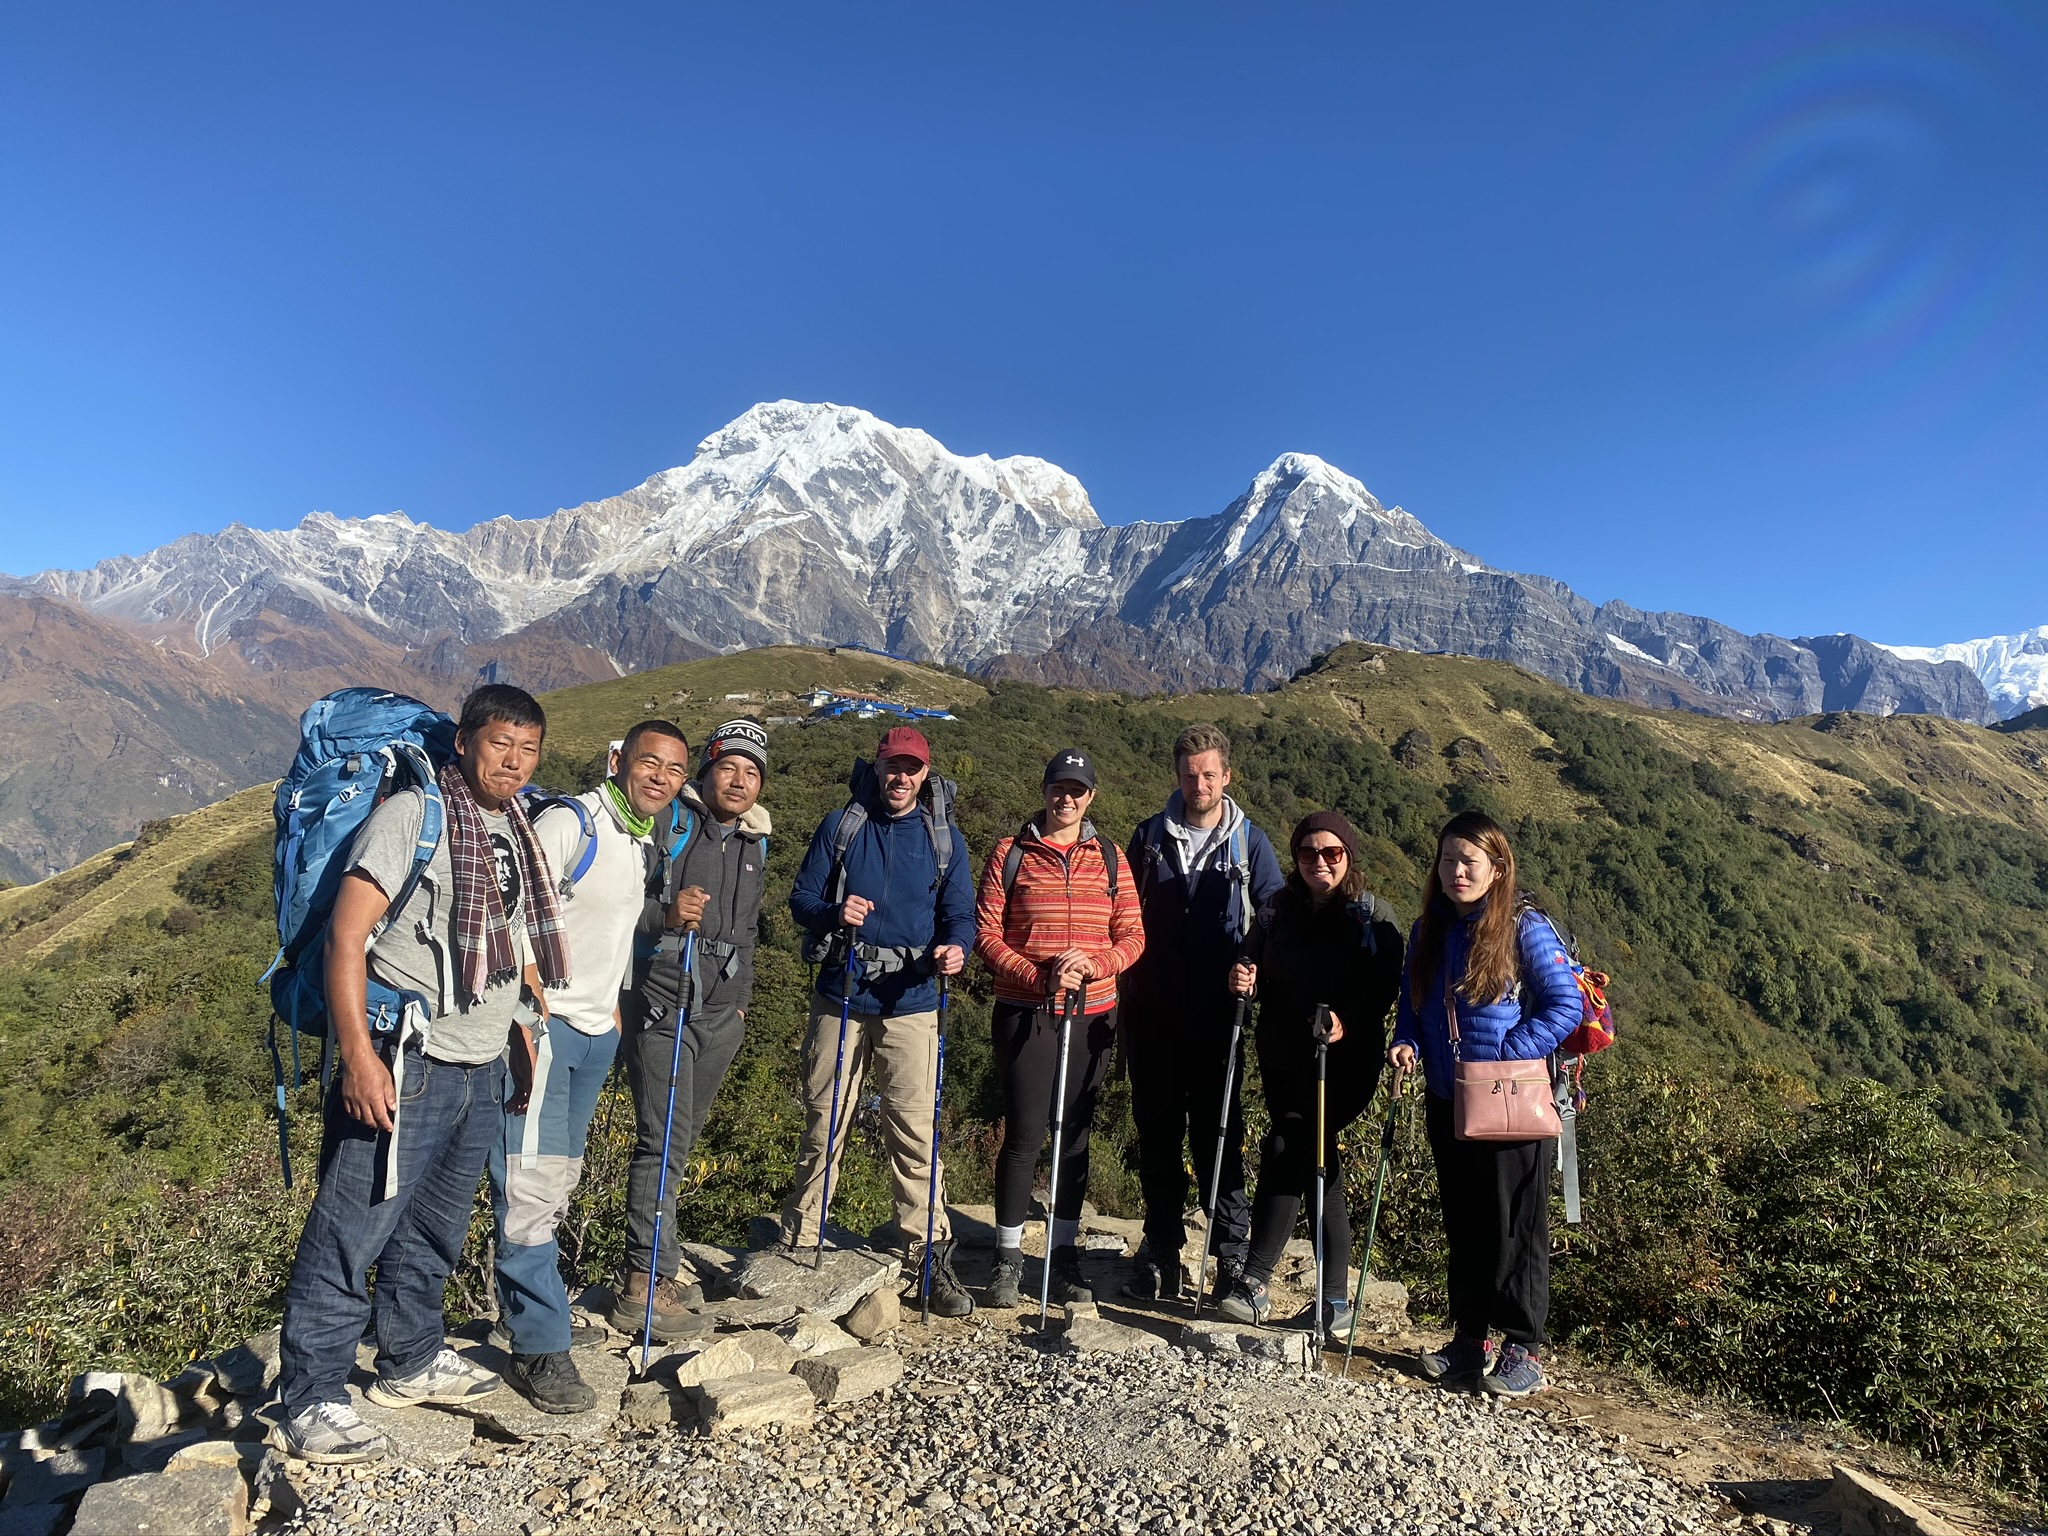 How to Find Trekking Guide in Pokhara